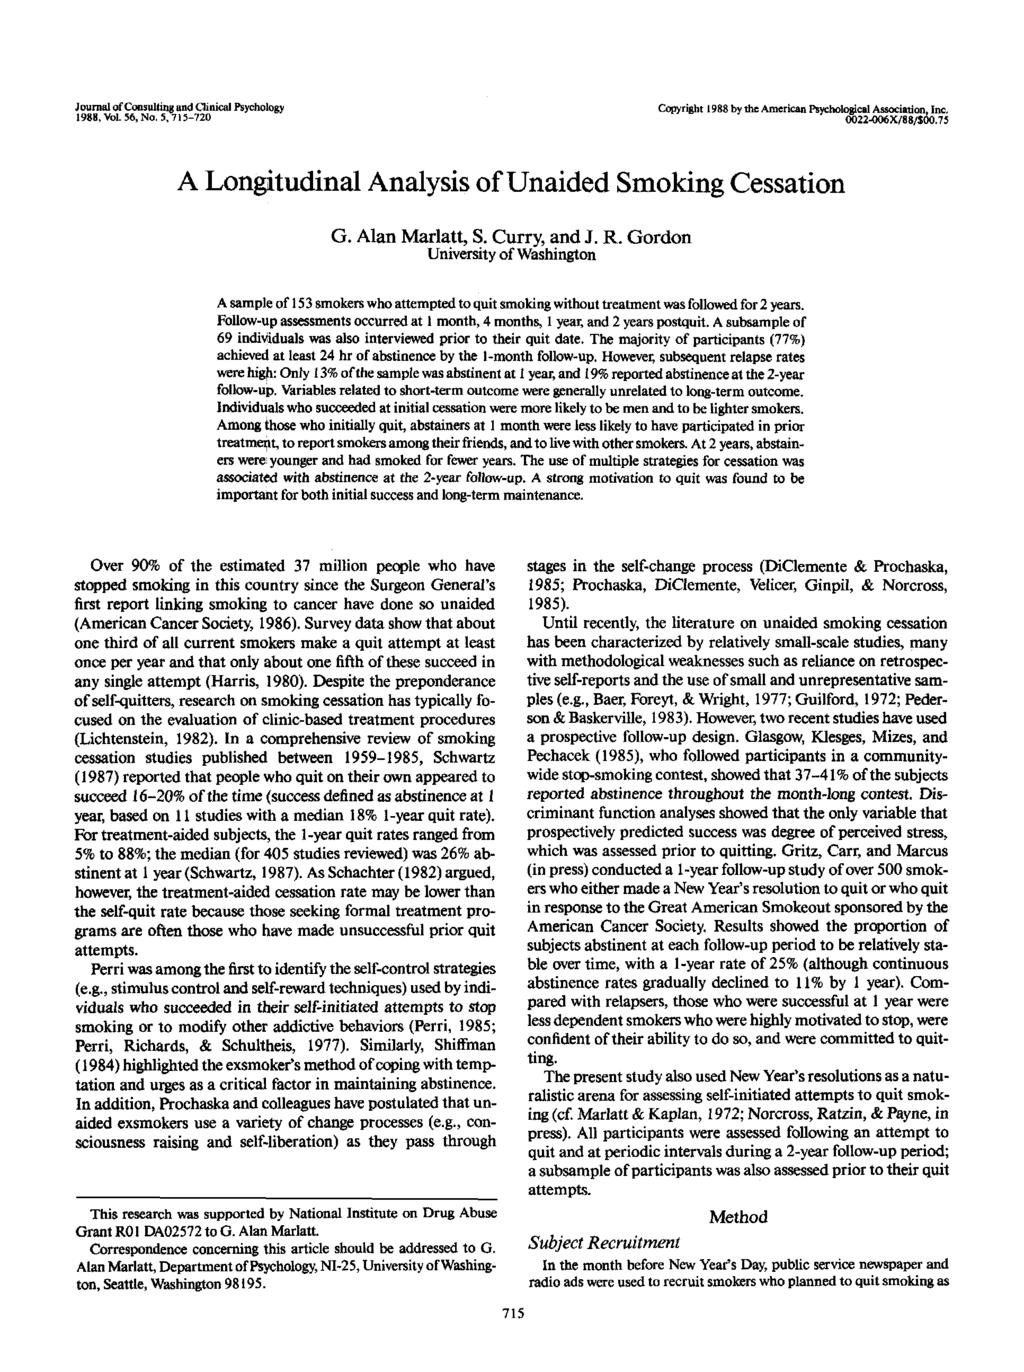 Journal of Consulting and Clinical Psychology 1988, Vol. 56, No. 5,715-720 Copyright 1988 by the American Psychological Association, Inc. 0022-006X/88/S00.